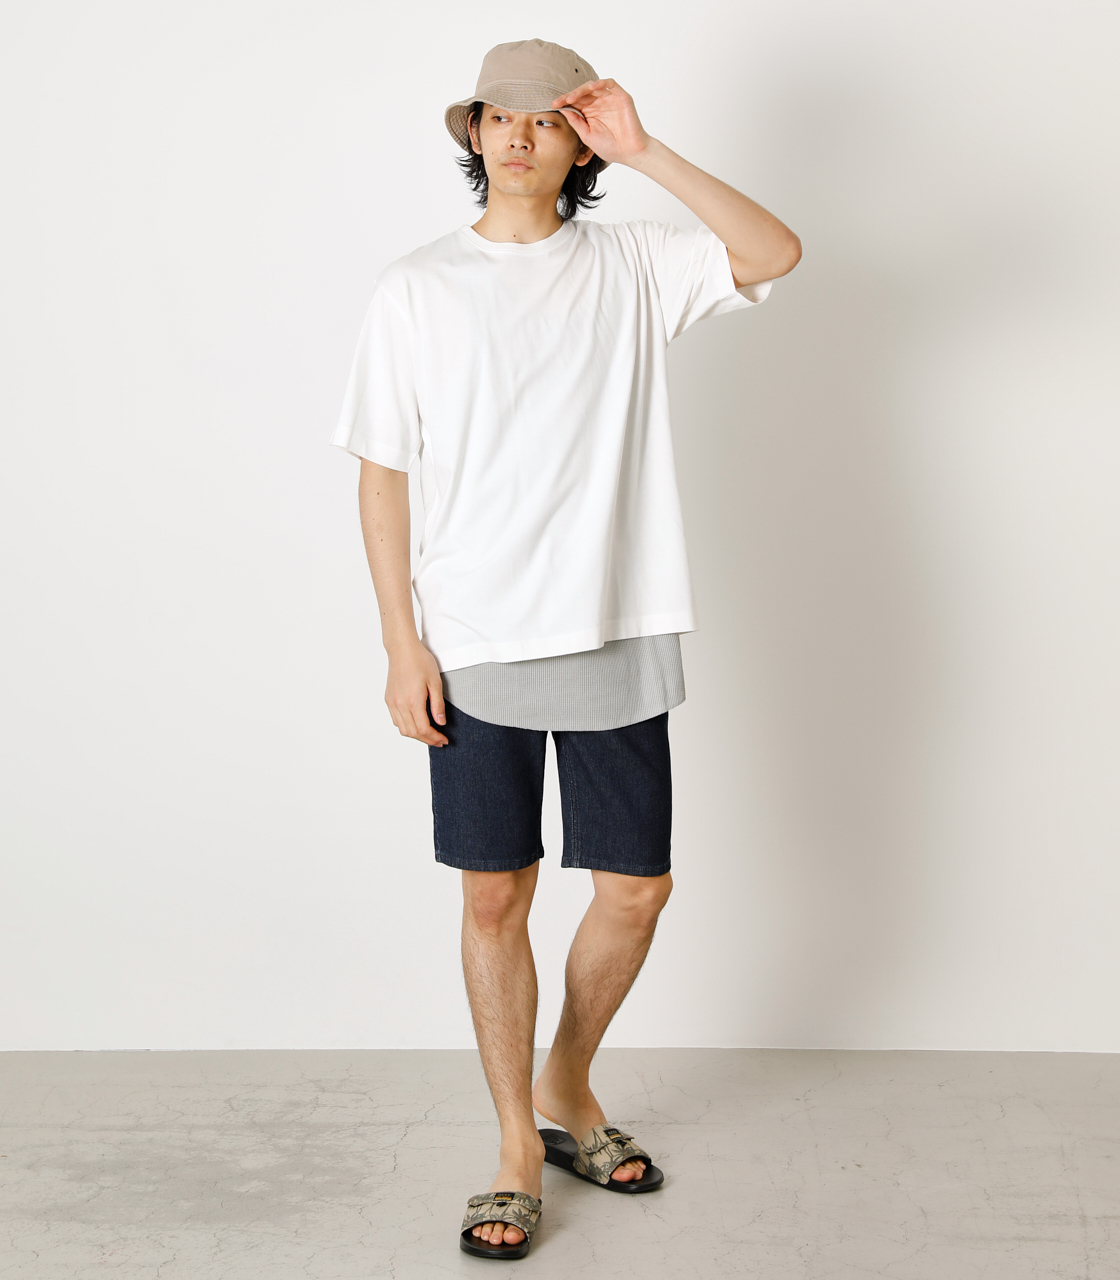 AIR BLOW SHORT PANTS/エアーブロウショートパンツ 詳細画像 One Wash 2